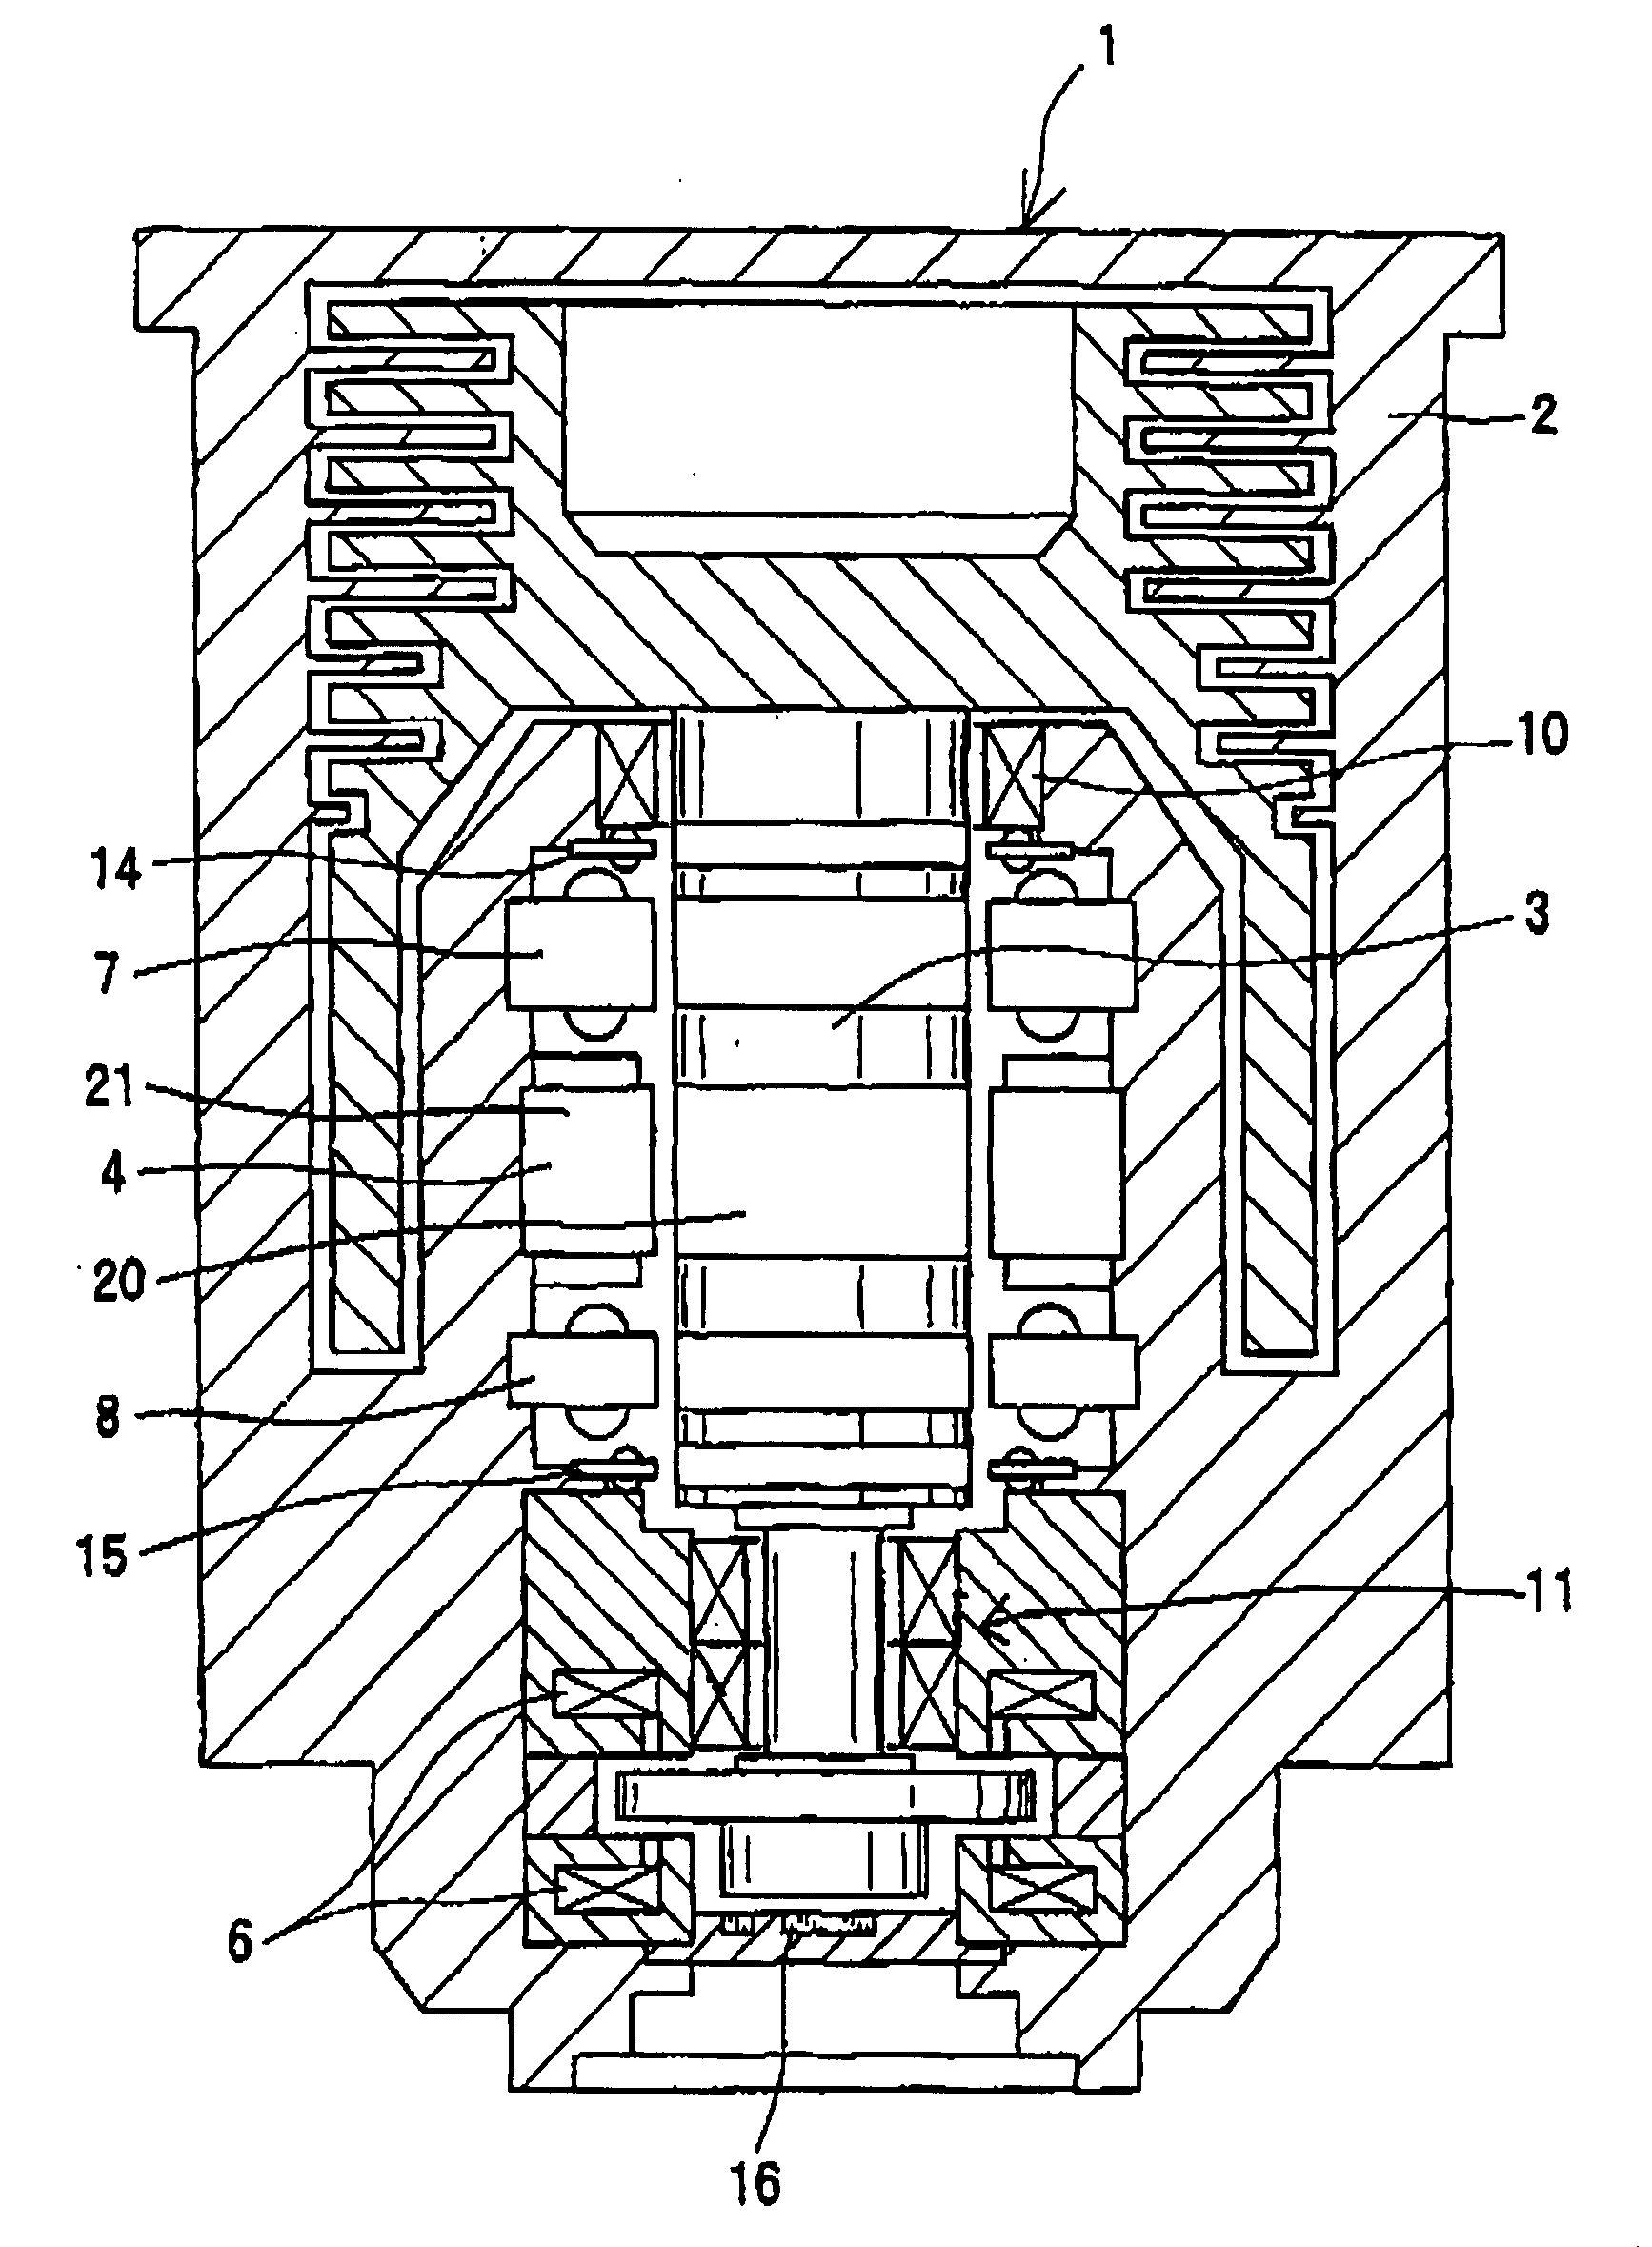 Turbo-molecular pump and touchdown bearing device